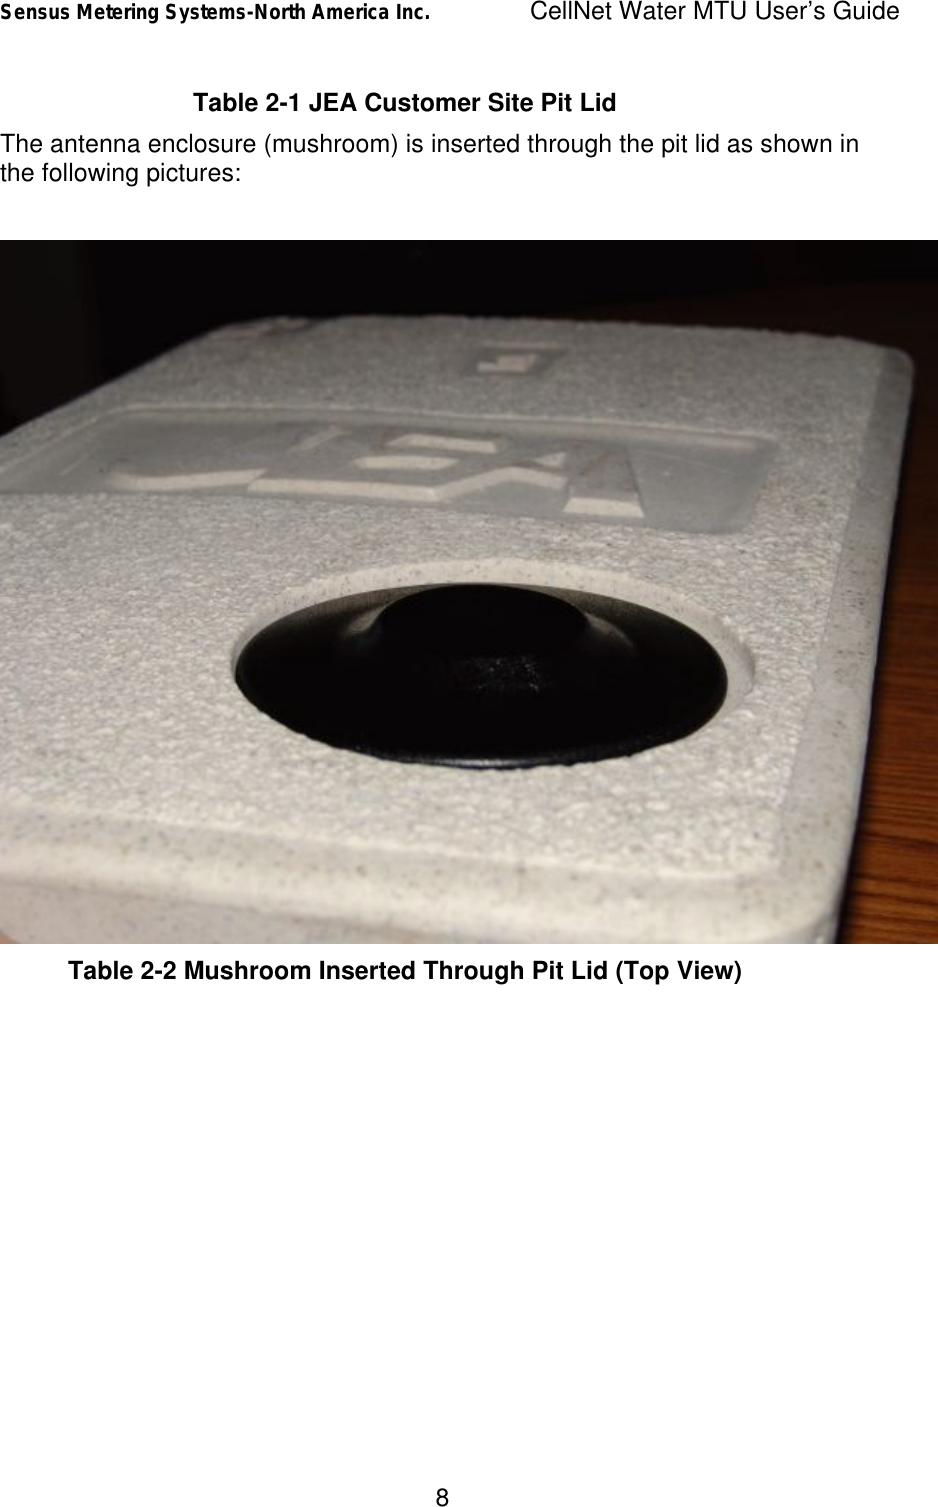 Sensus Metering Systems-North America Inc.    CellNet Water MTU User’s Guide 8 Table 2-1 JEA Customer Site Pit Lid The antenna enclosure (mushroom) is inserted through the pit lid as shown in the following pictures:   Table 2-2 Mushroom Inserted Through Pit Lid (Top View)  